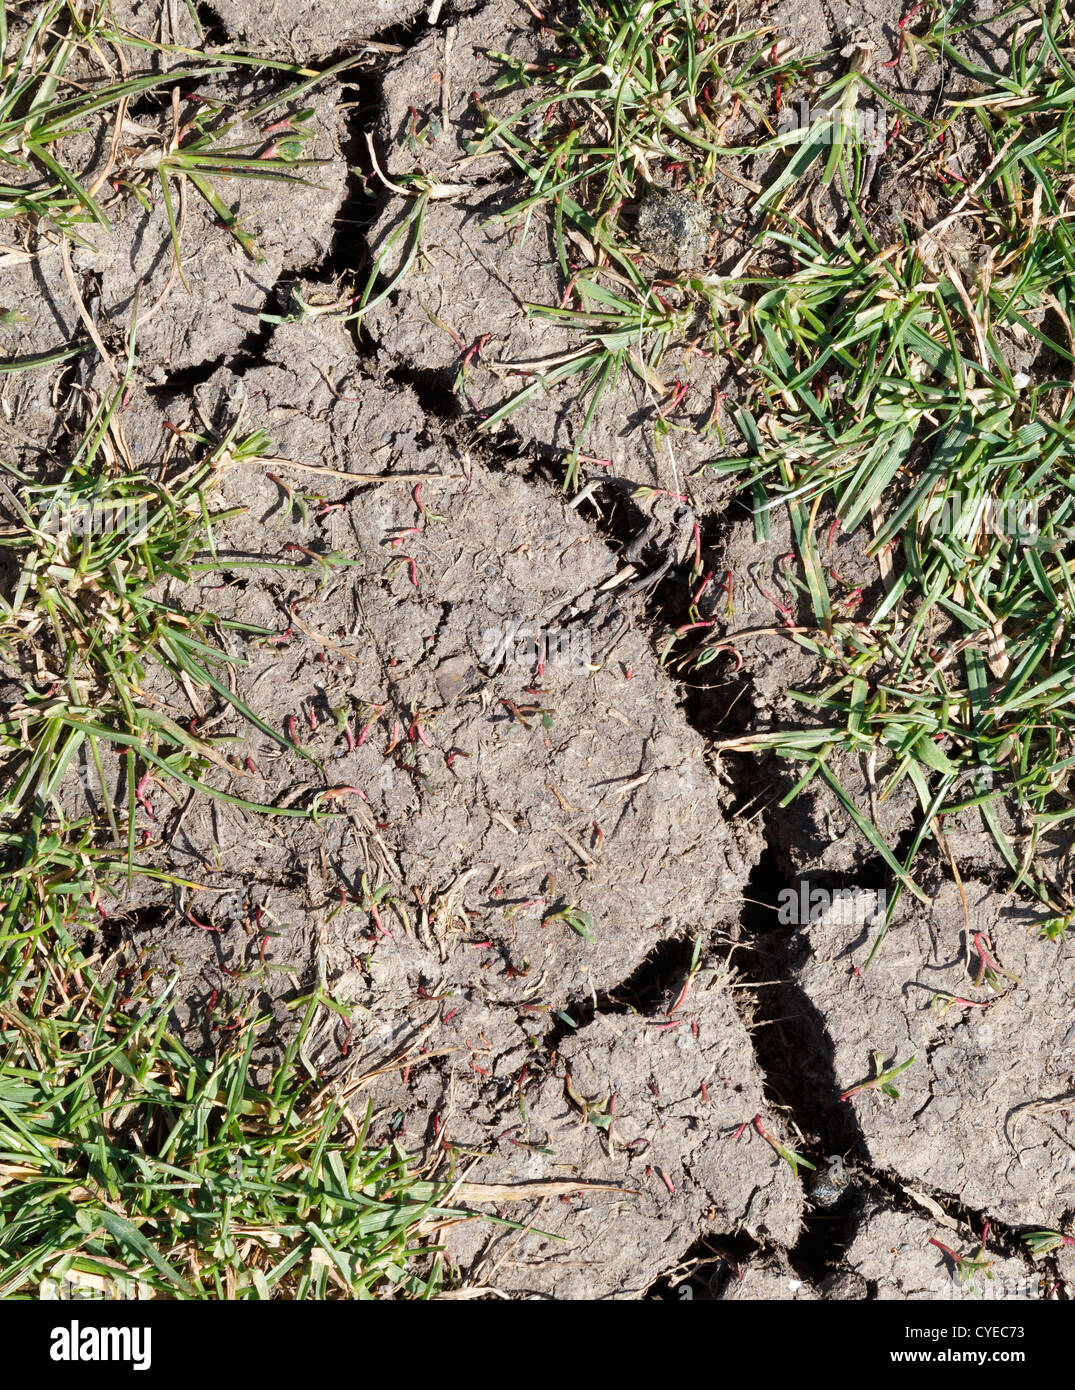 Cracked dry earth with blades of green grass Stock Photo